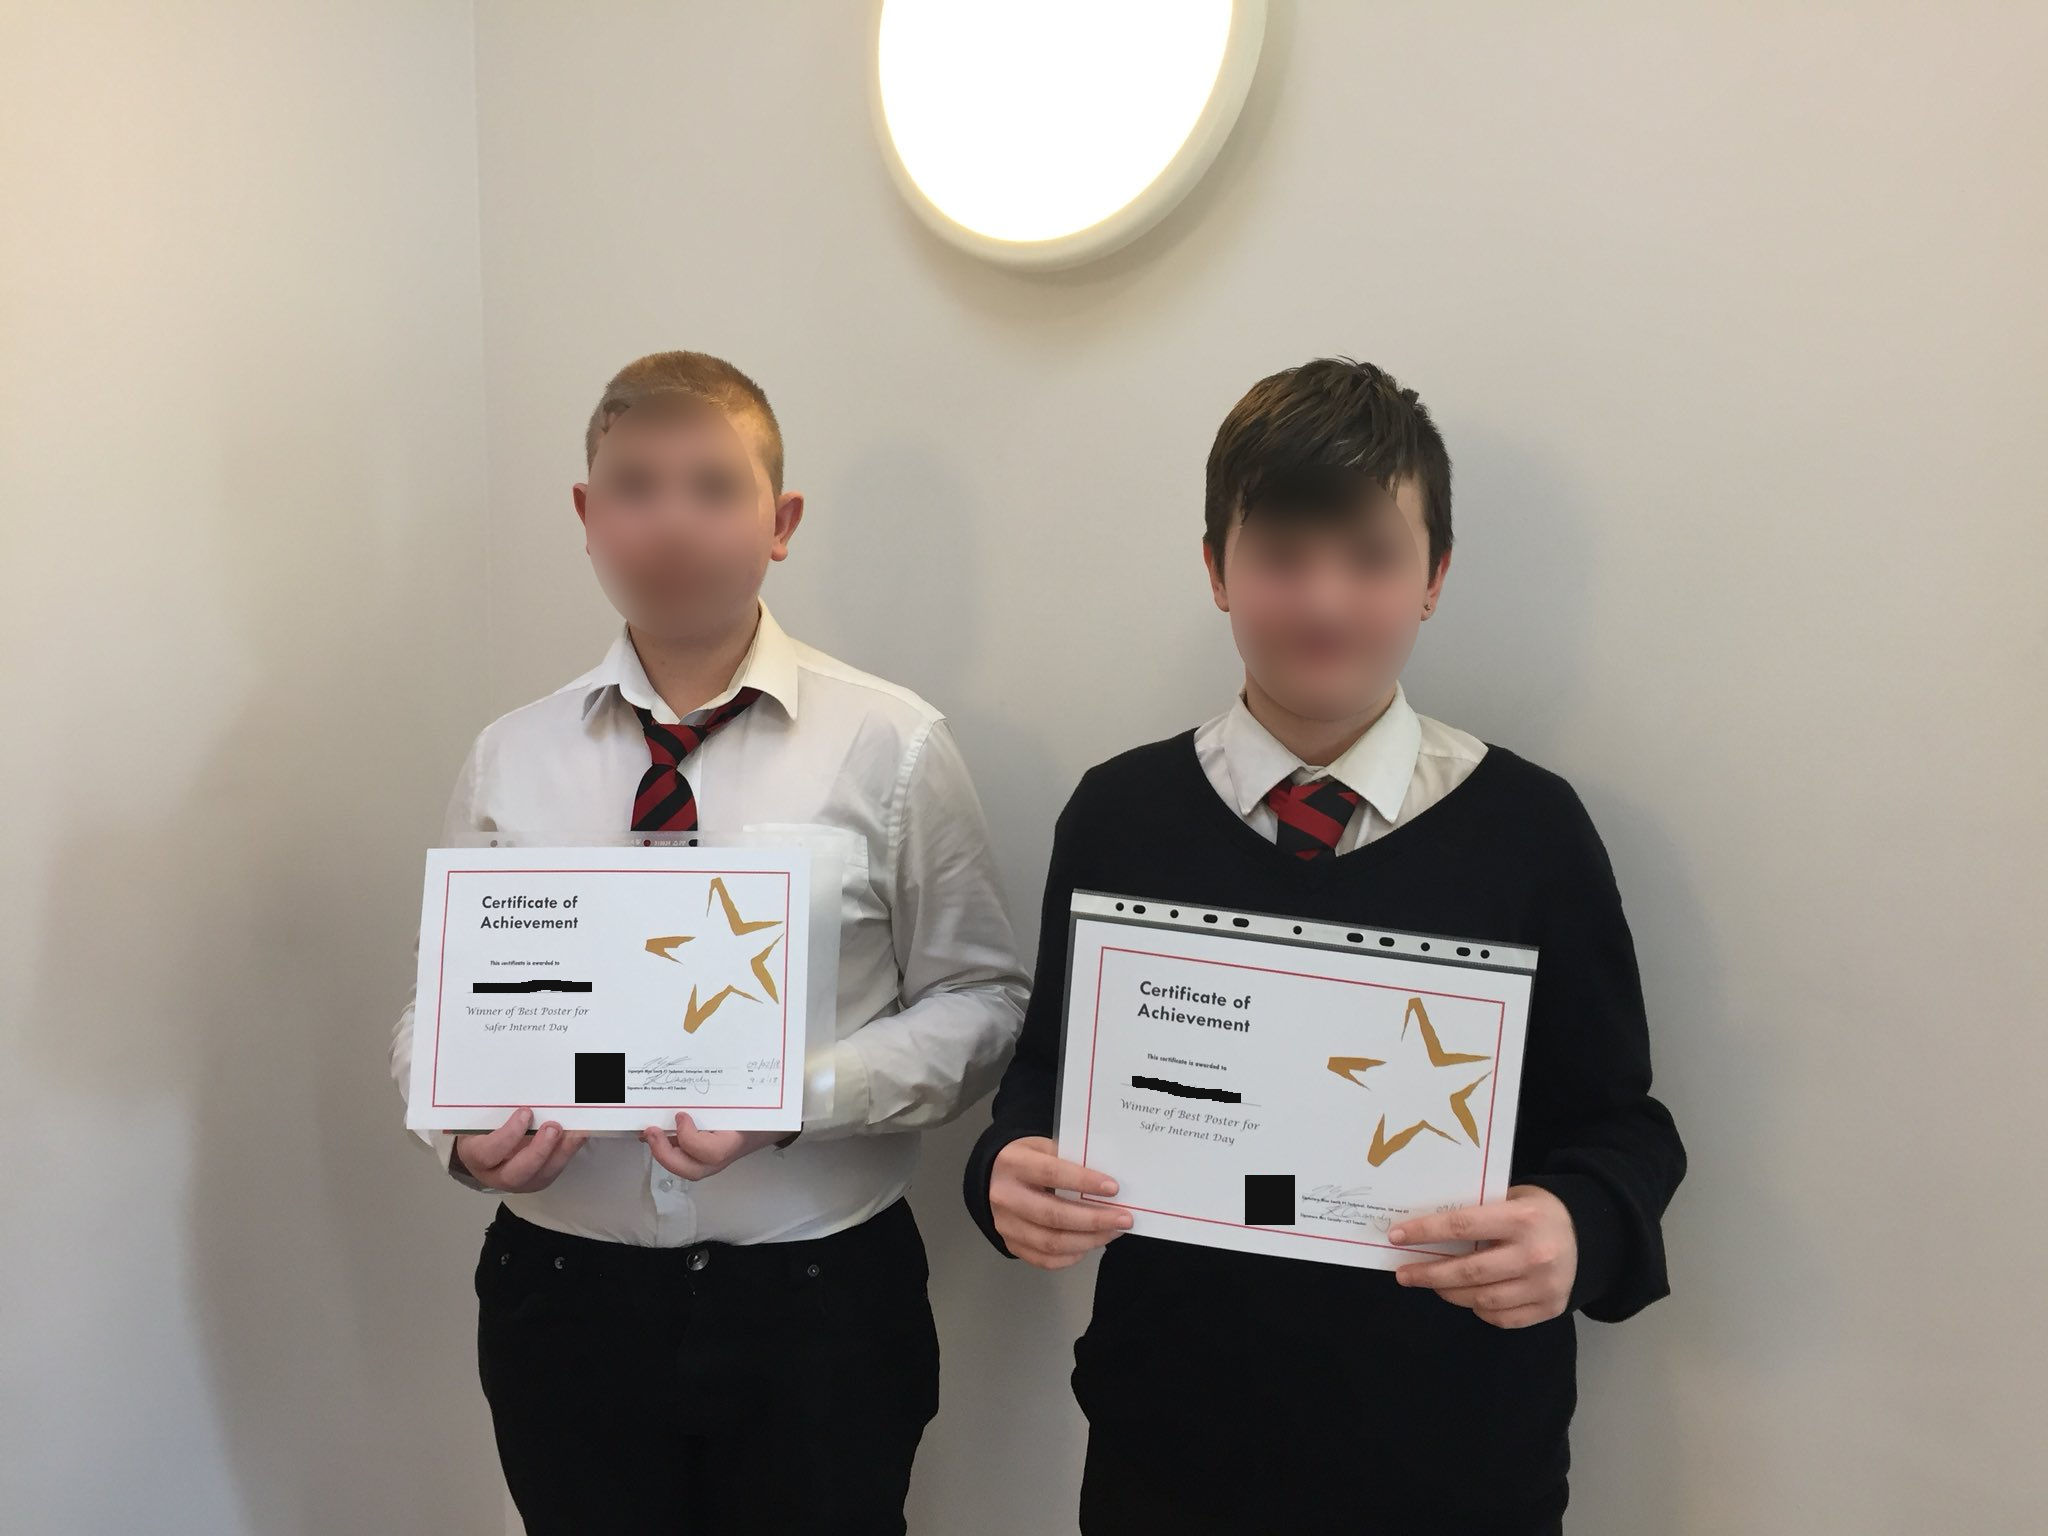 More students holding up certificates for safer internet day